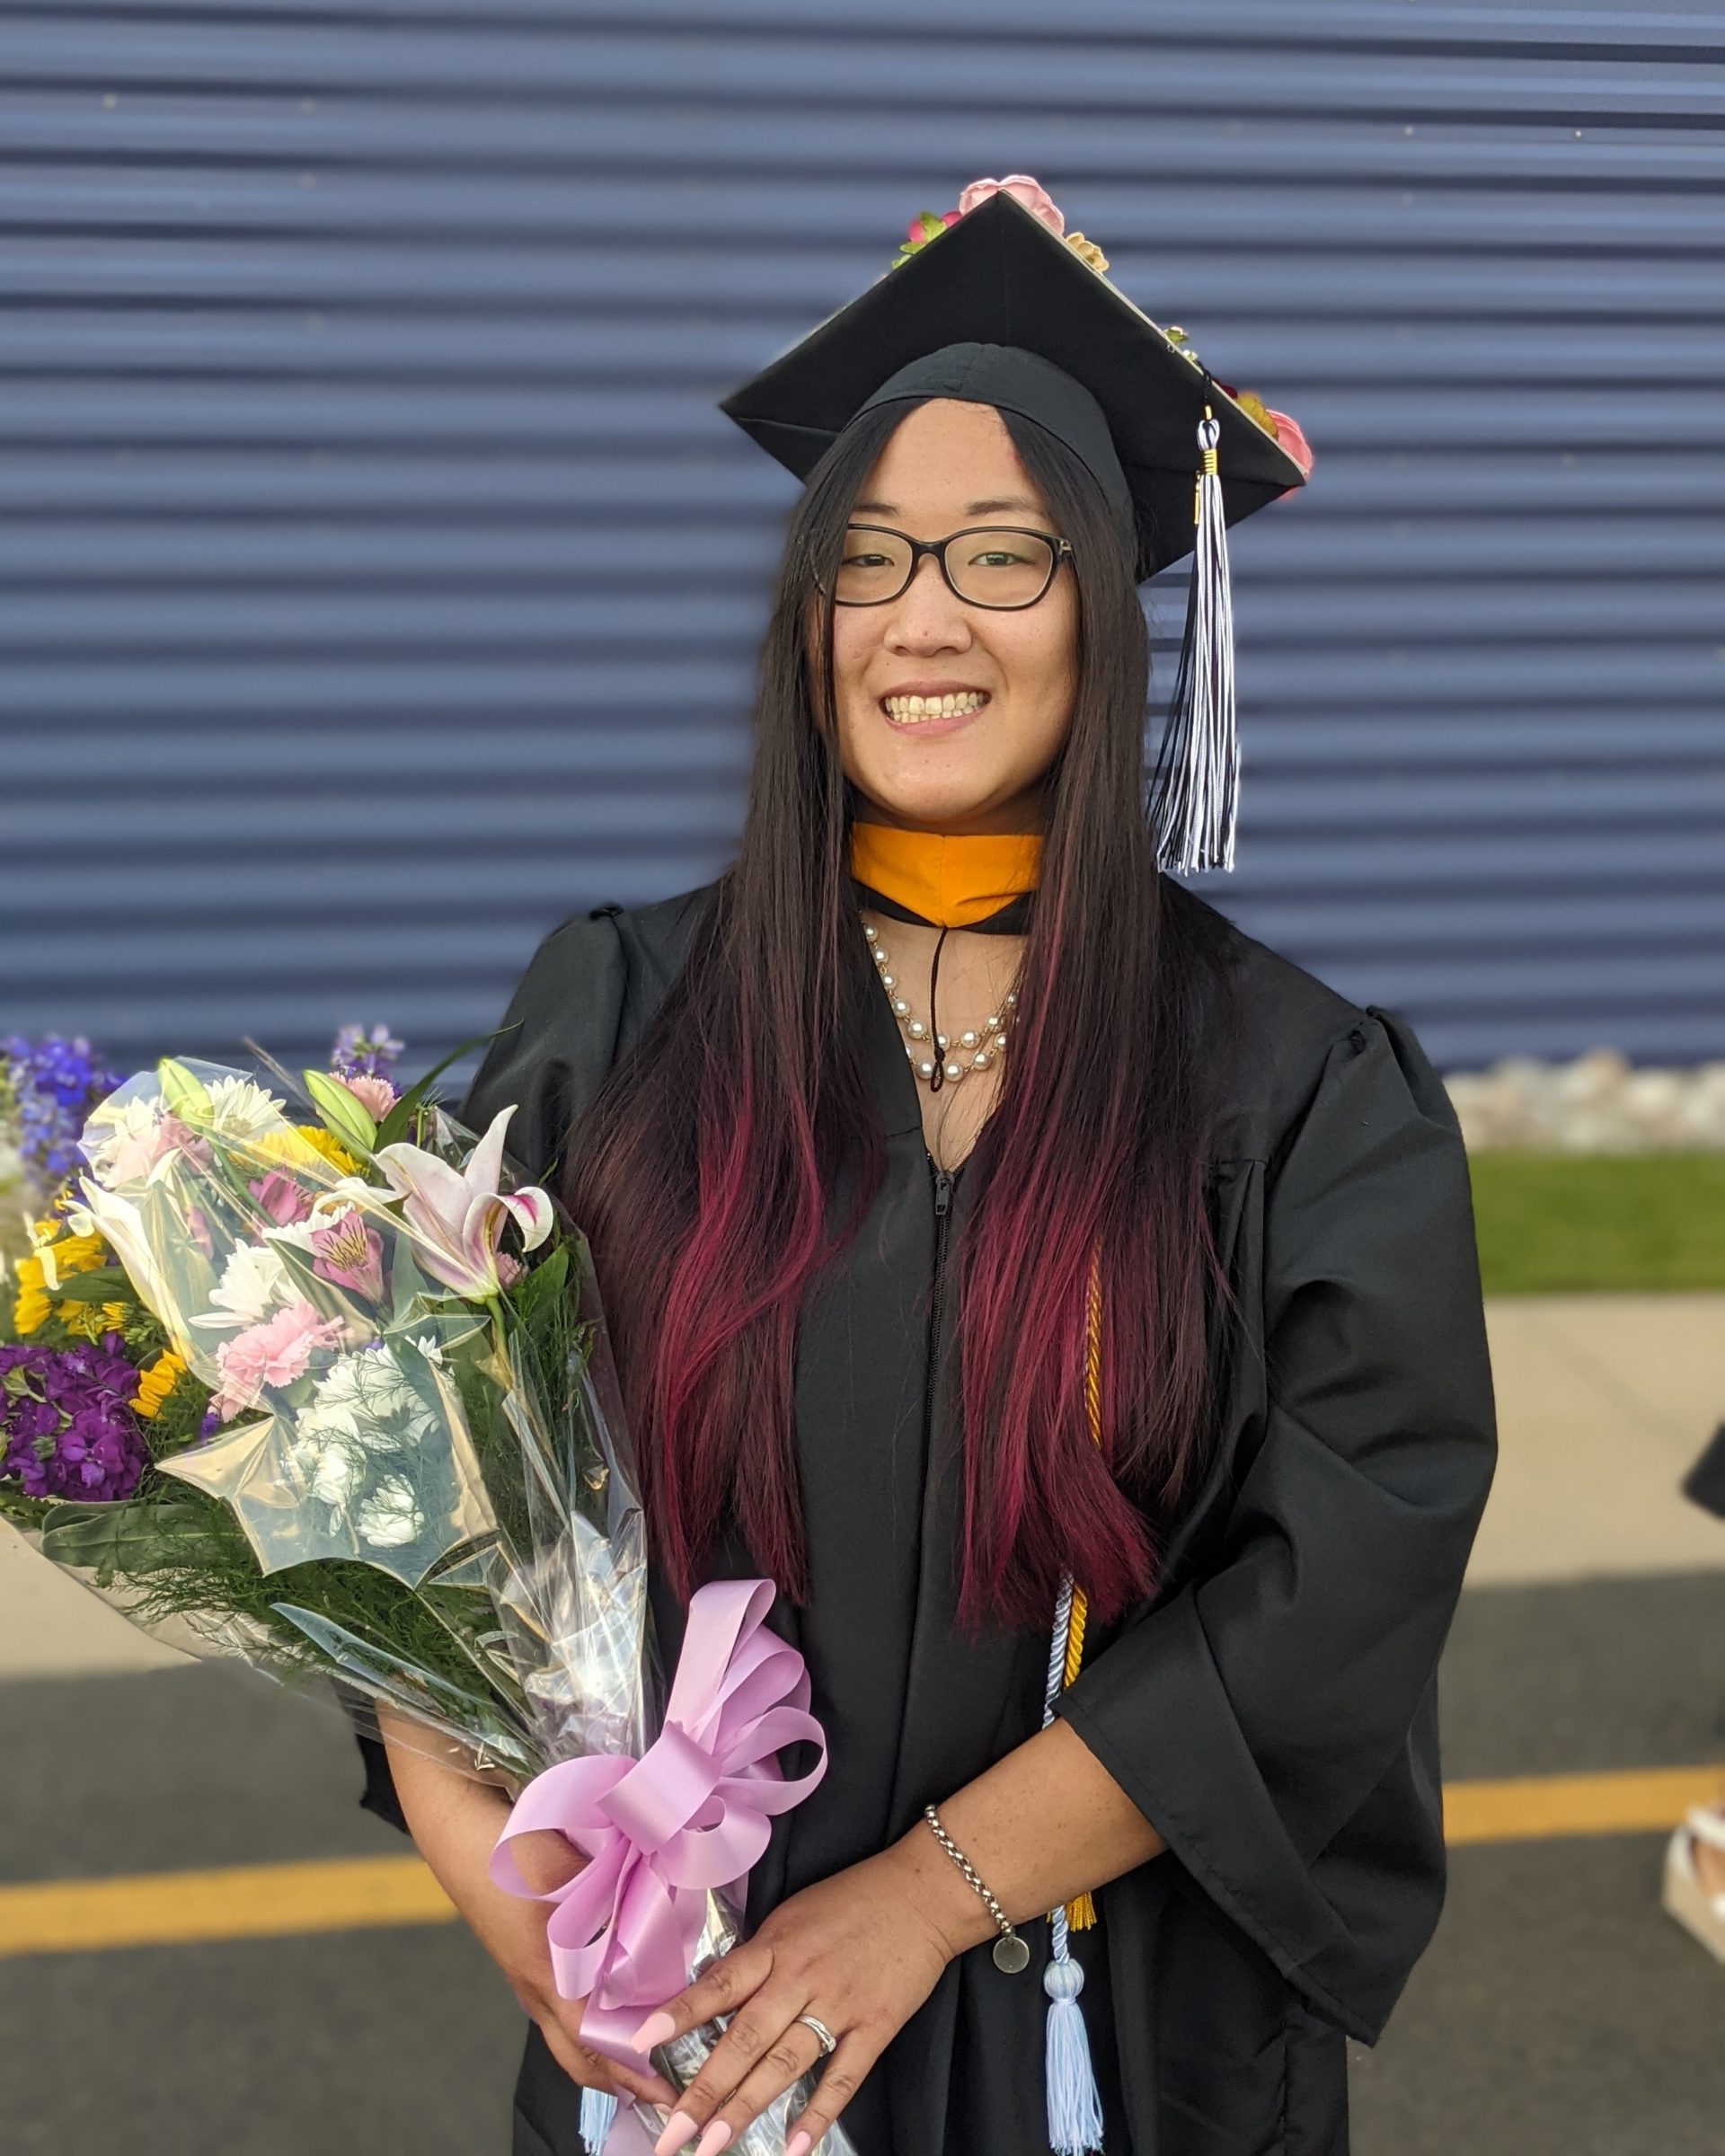 smiling girl wearing black graduation cap and gown holding bouquet of flowers